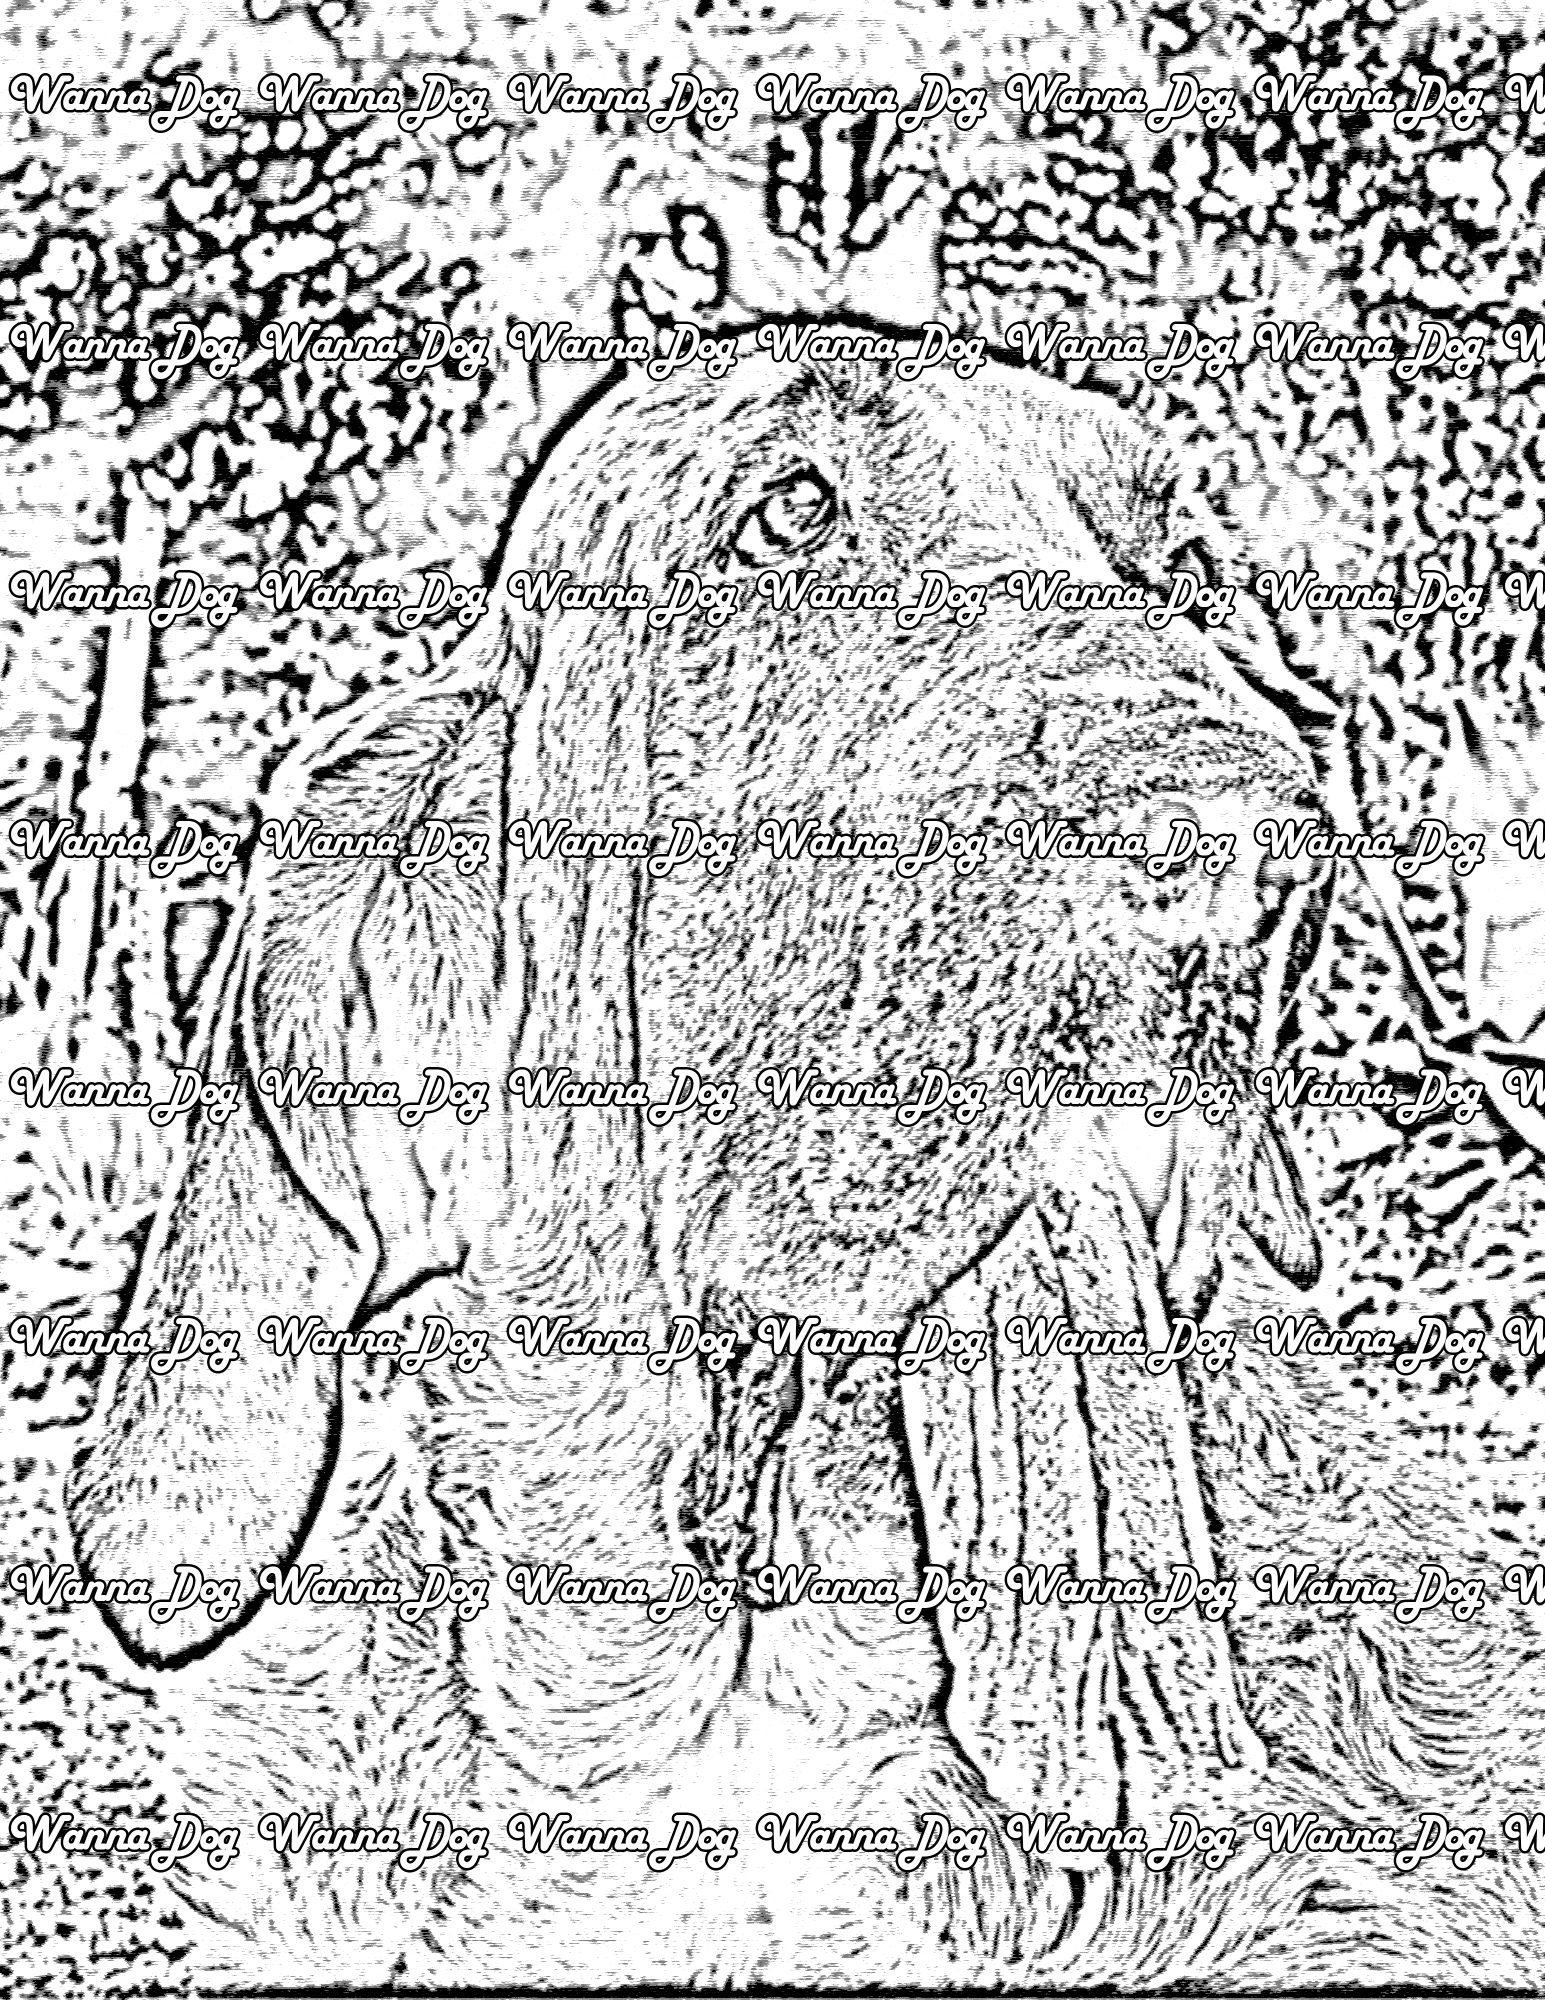 Bloodhound Coloring Page of a Bloodhound with their tongue out